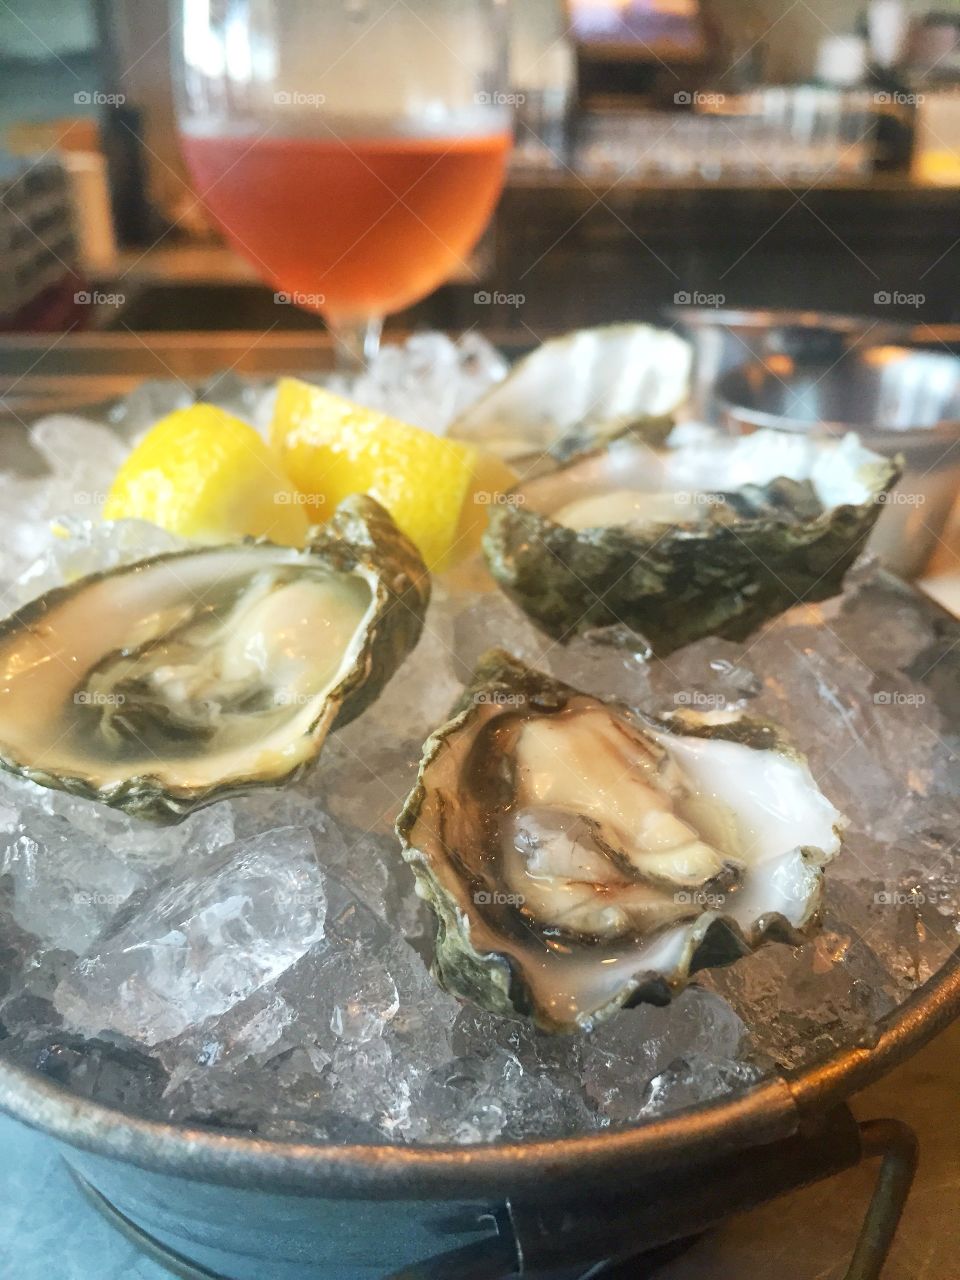 Raw oysters 